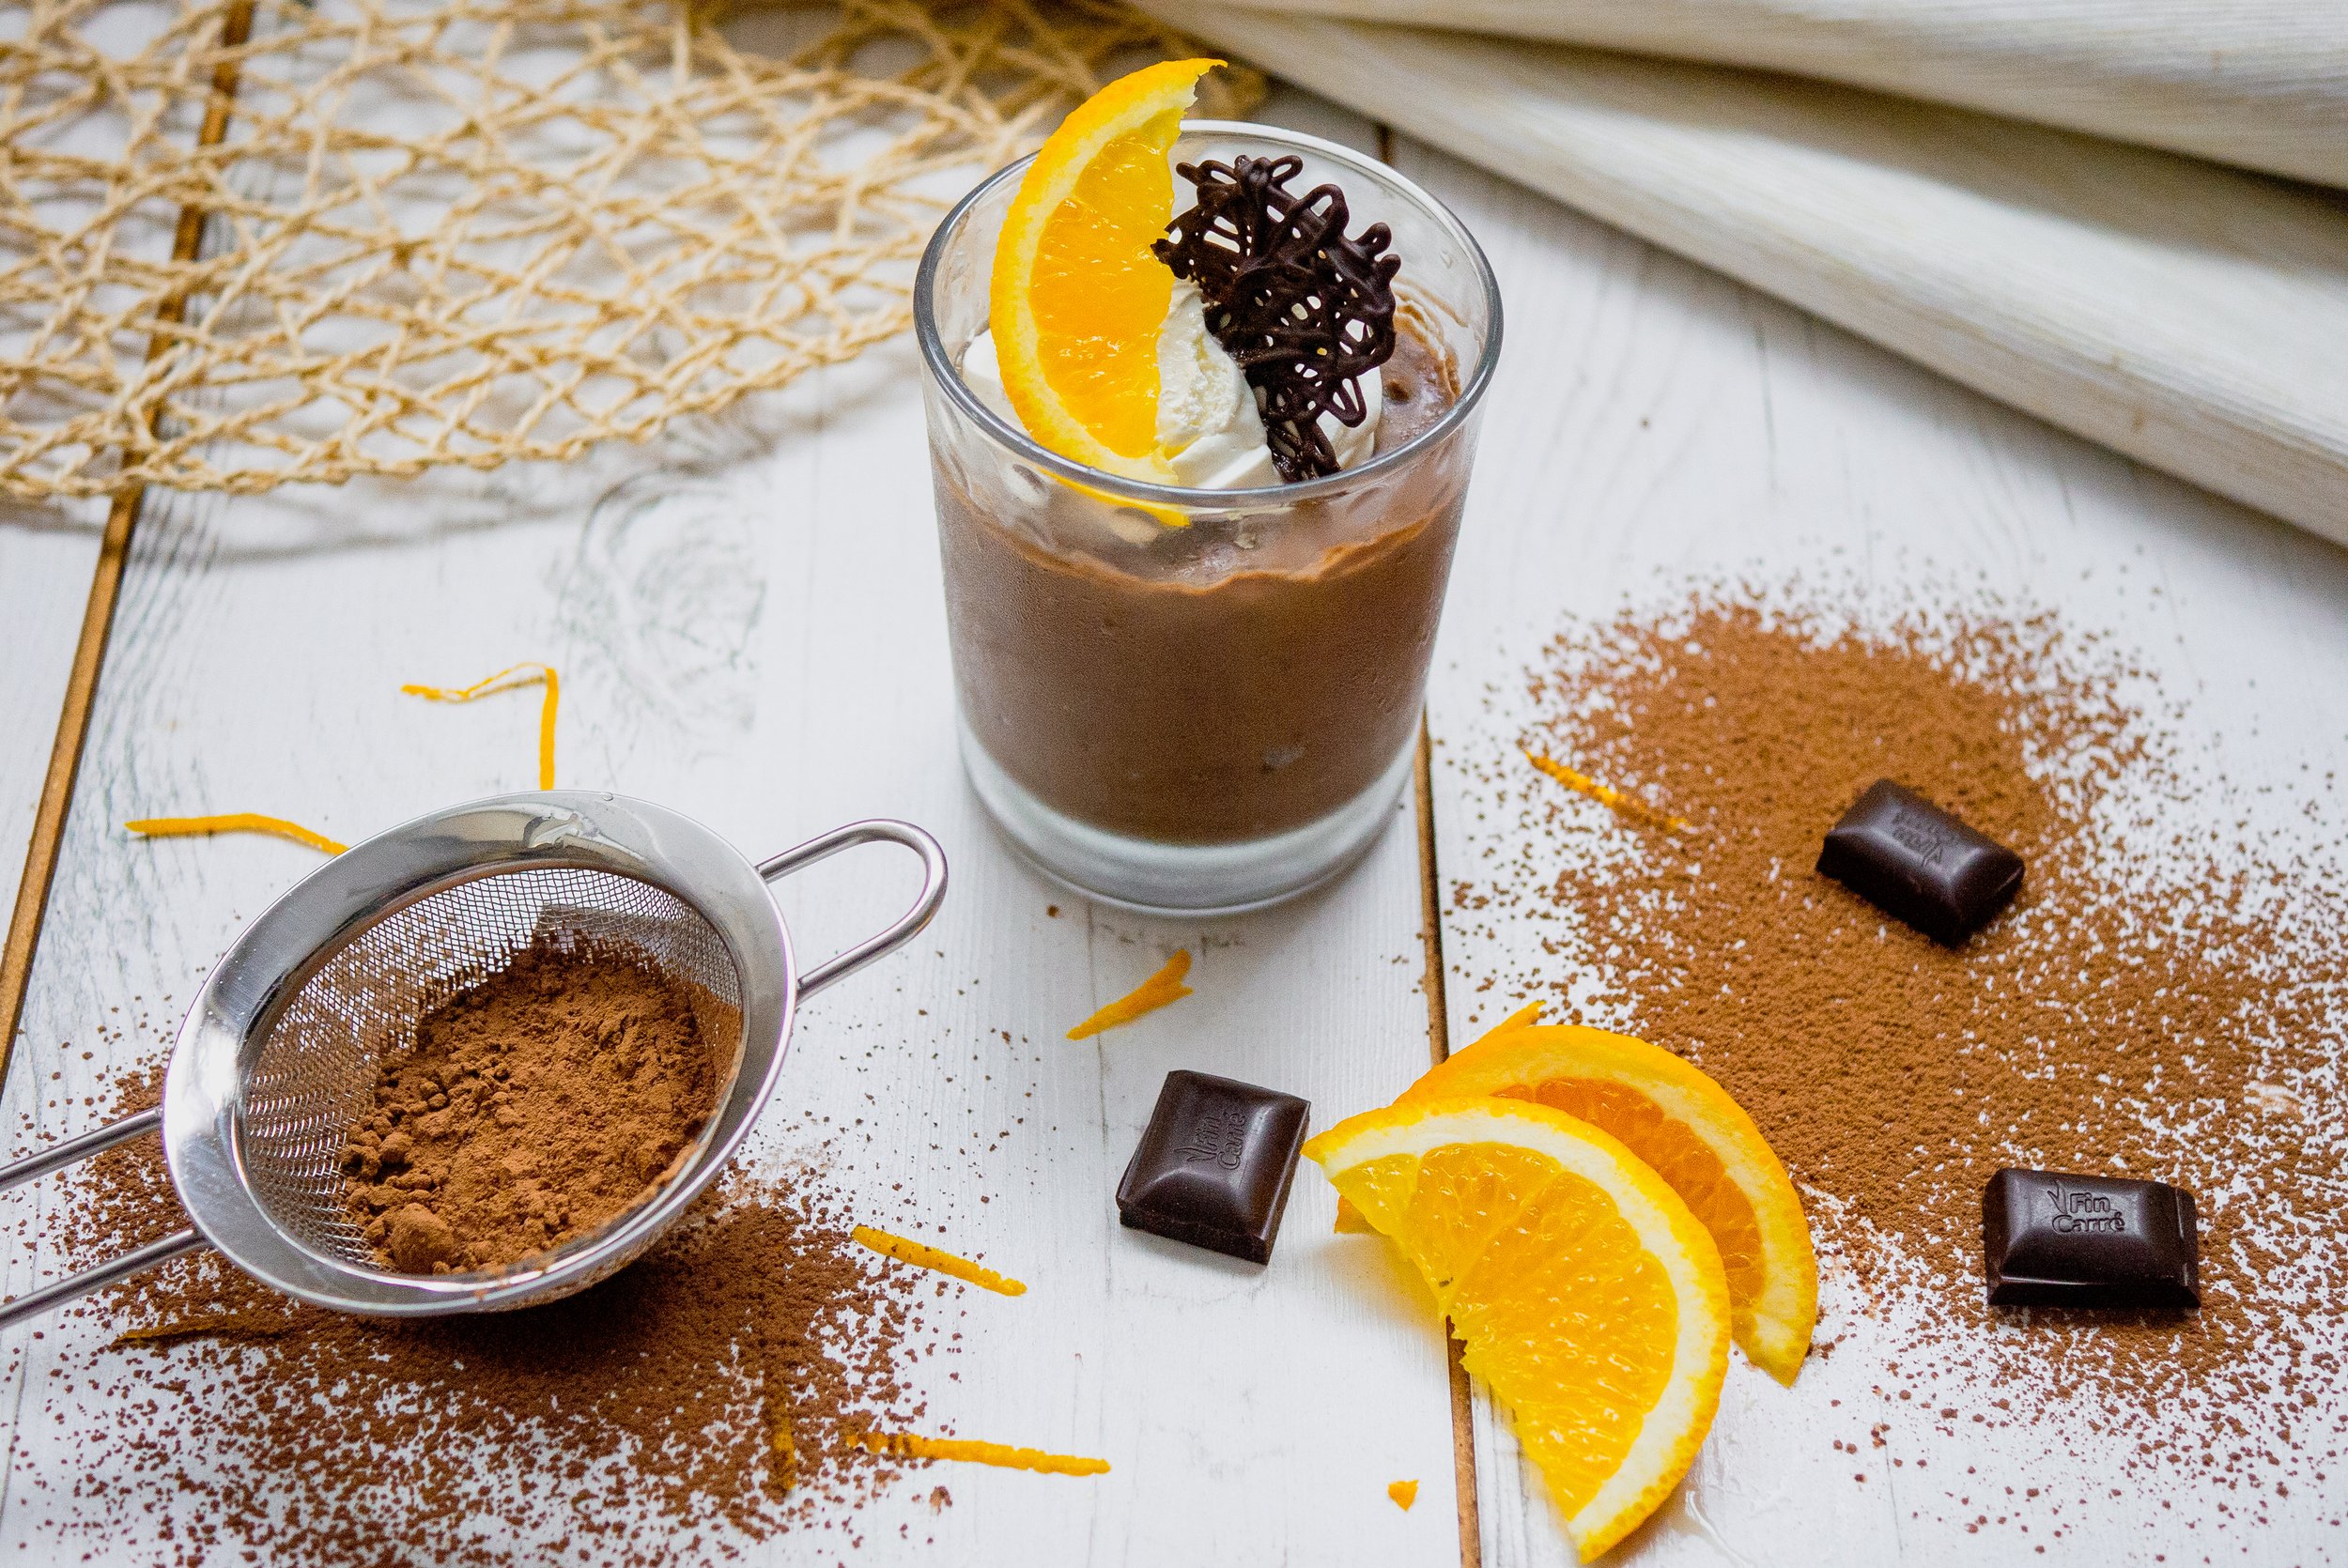 chocolate and orange mousse by kam sokhi allergy chef 